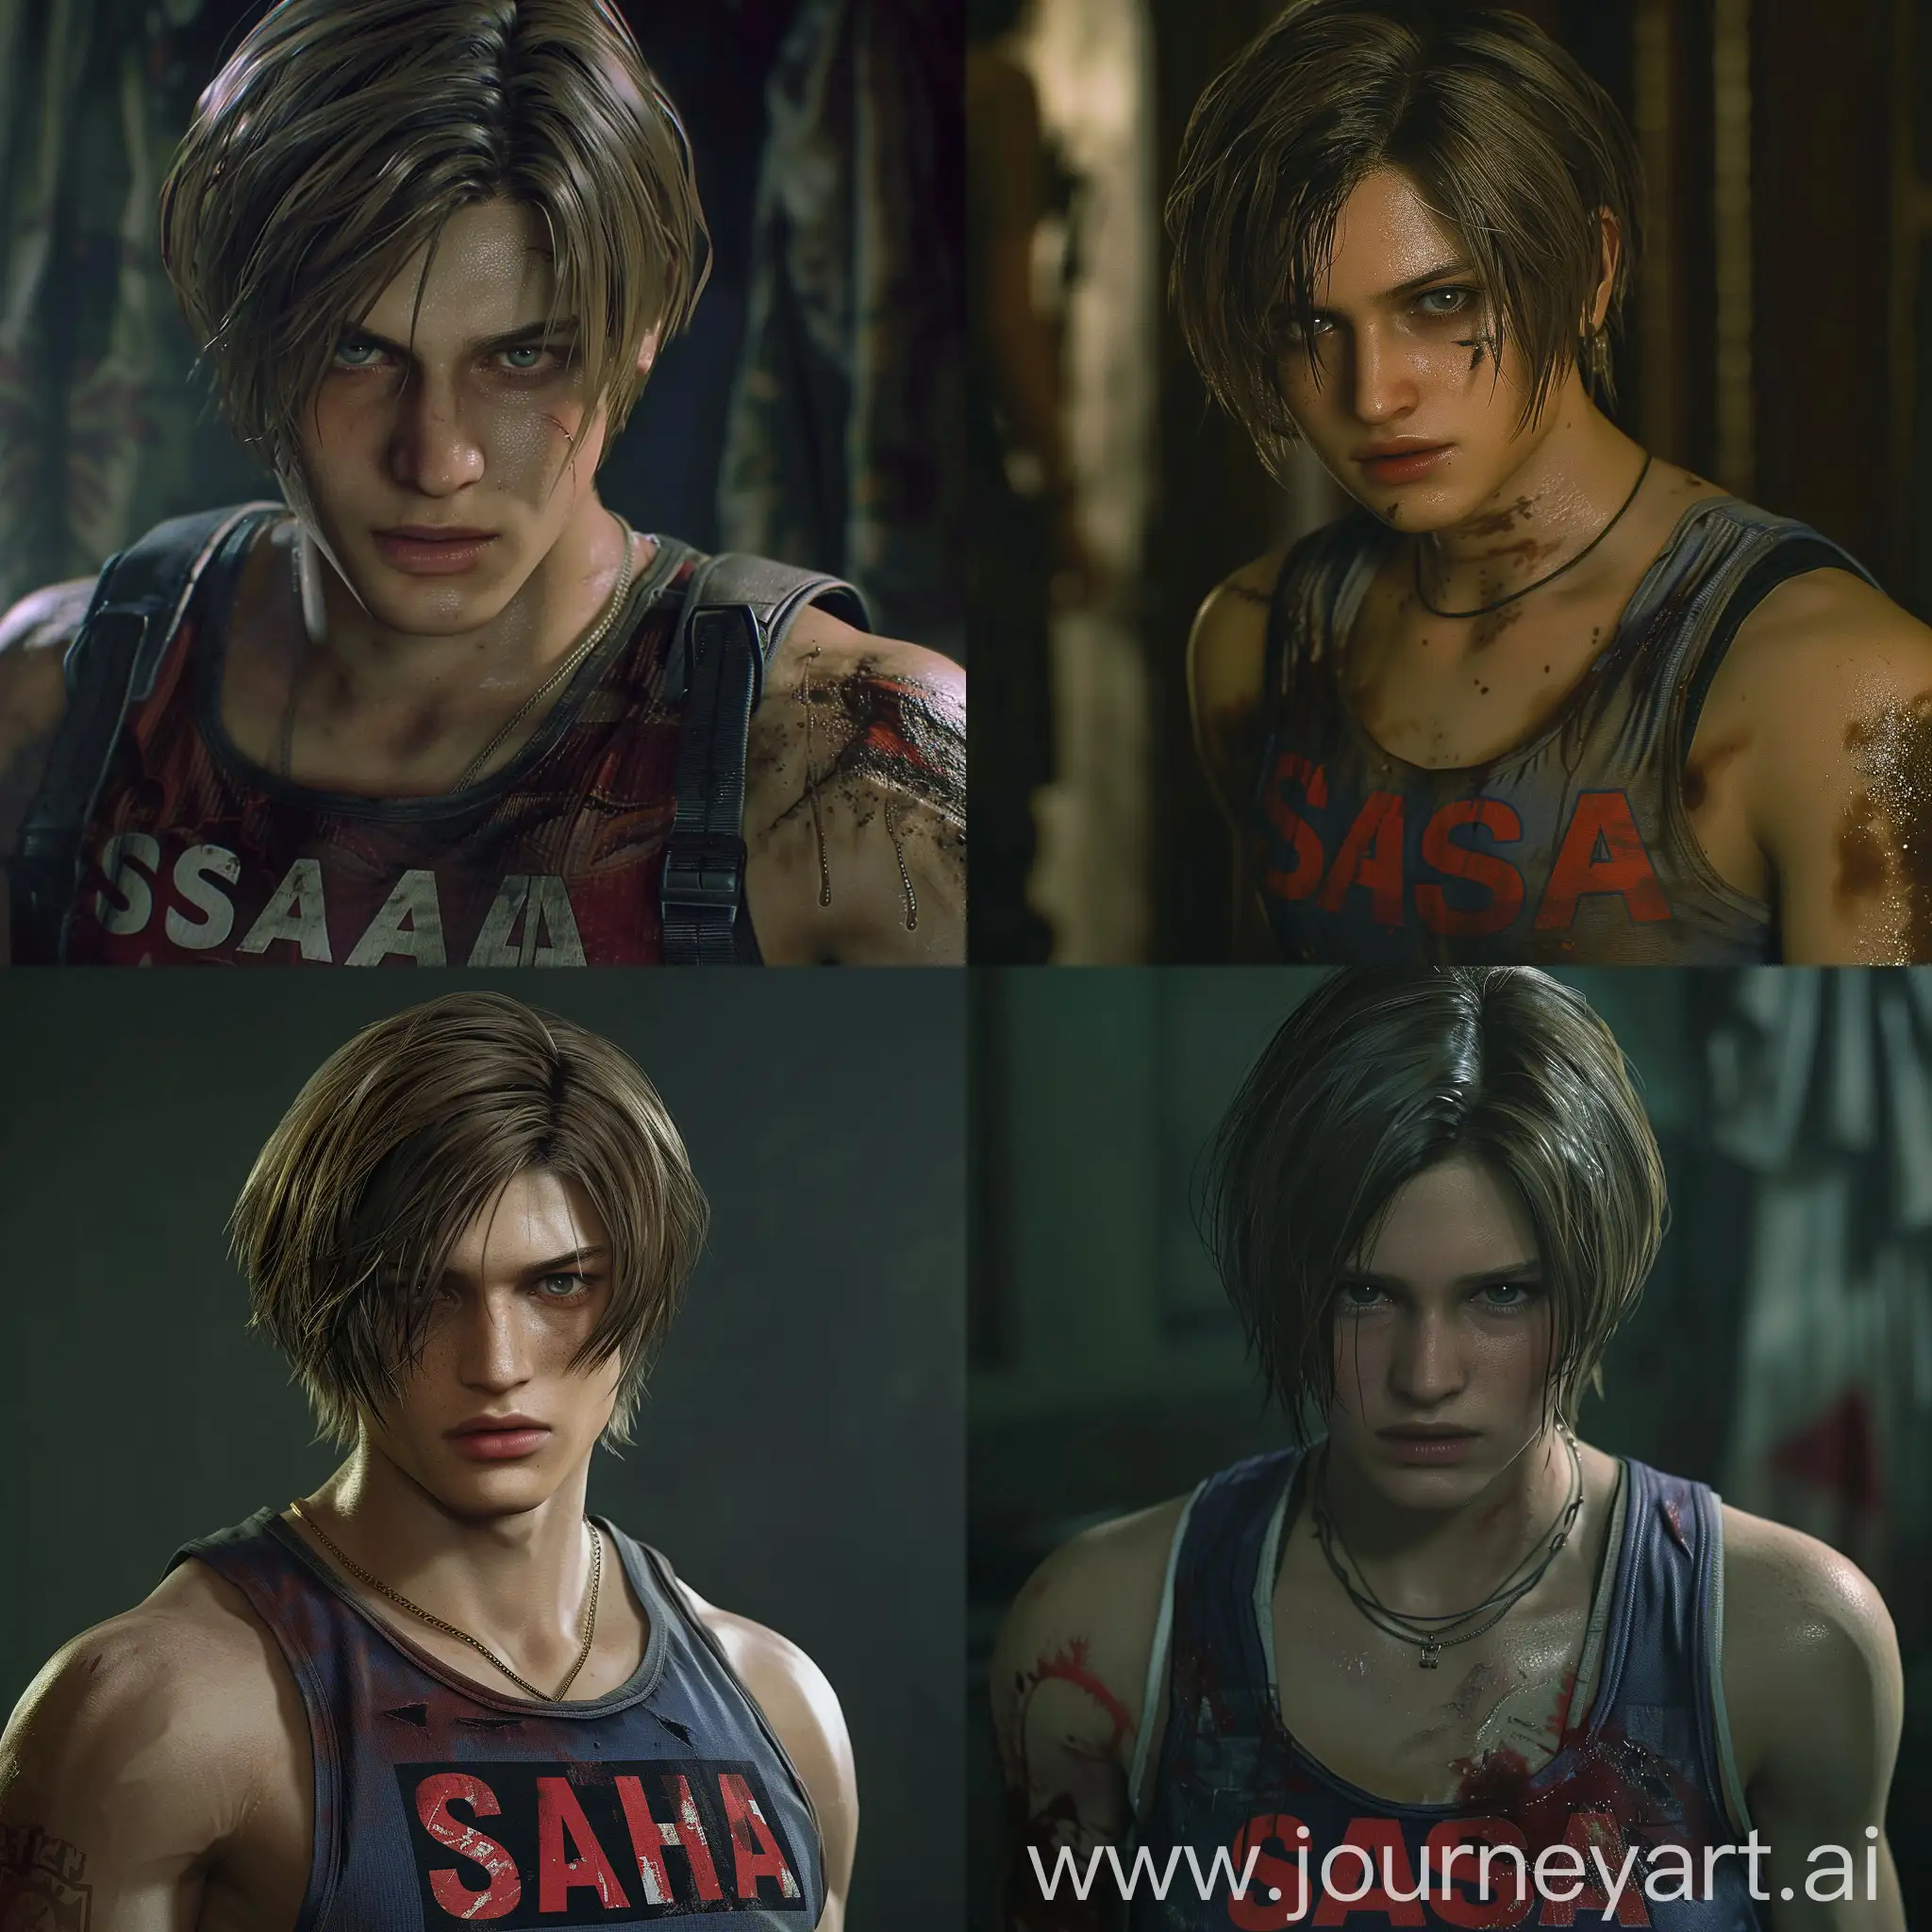 Leon Kennedy from Resident Evil 4 Remake in a tank top with that says "SASHA" on it., close-up portrait